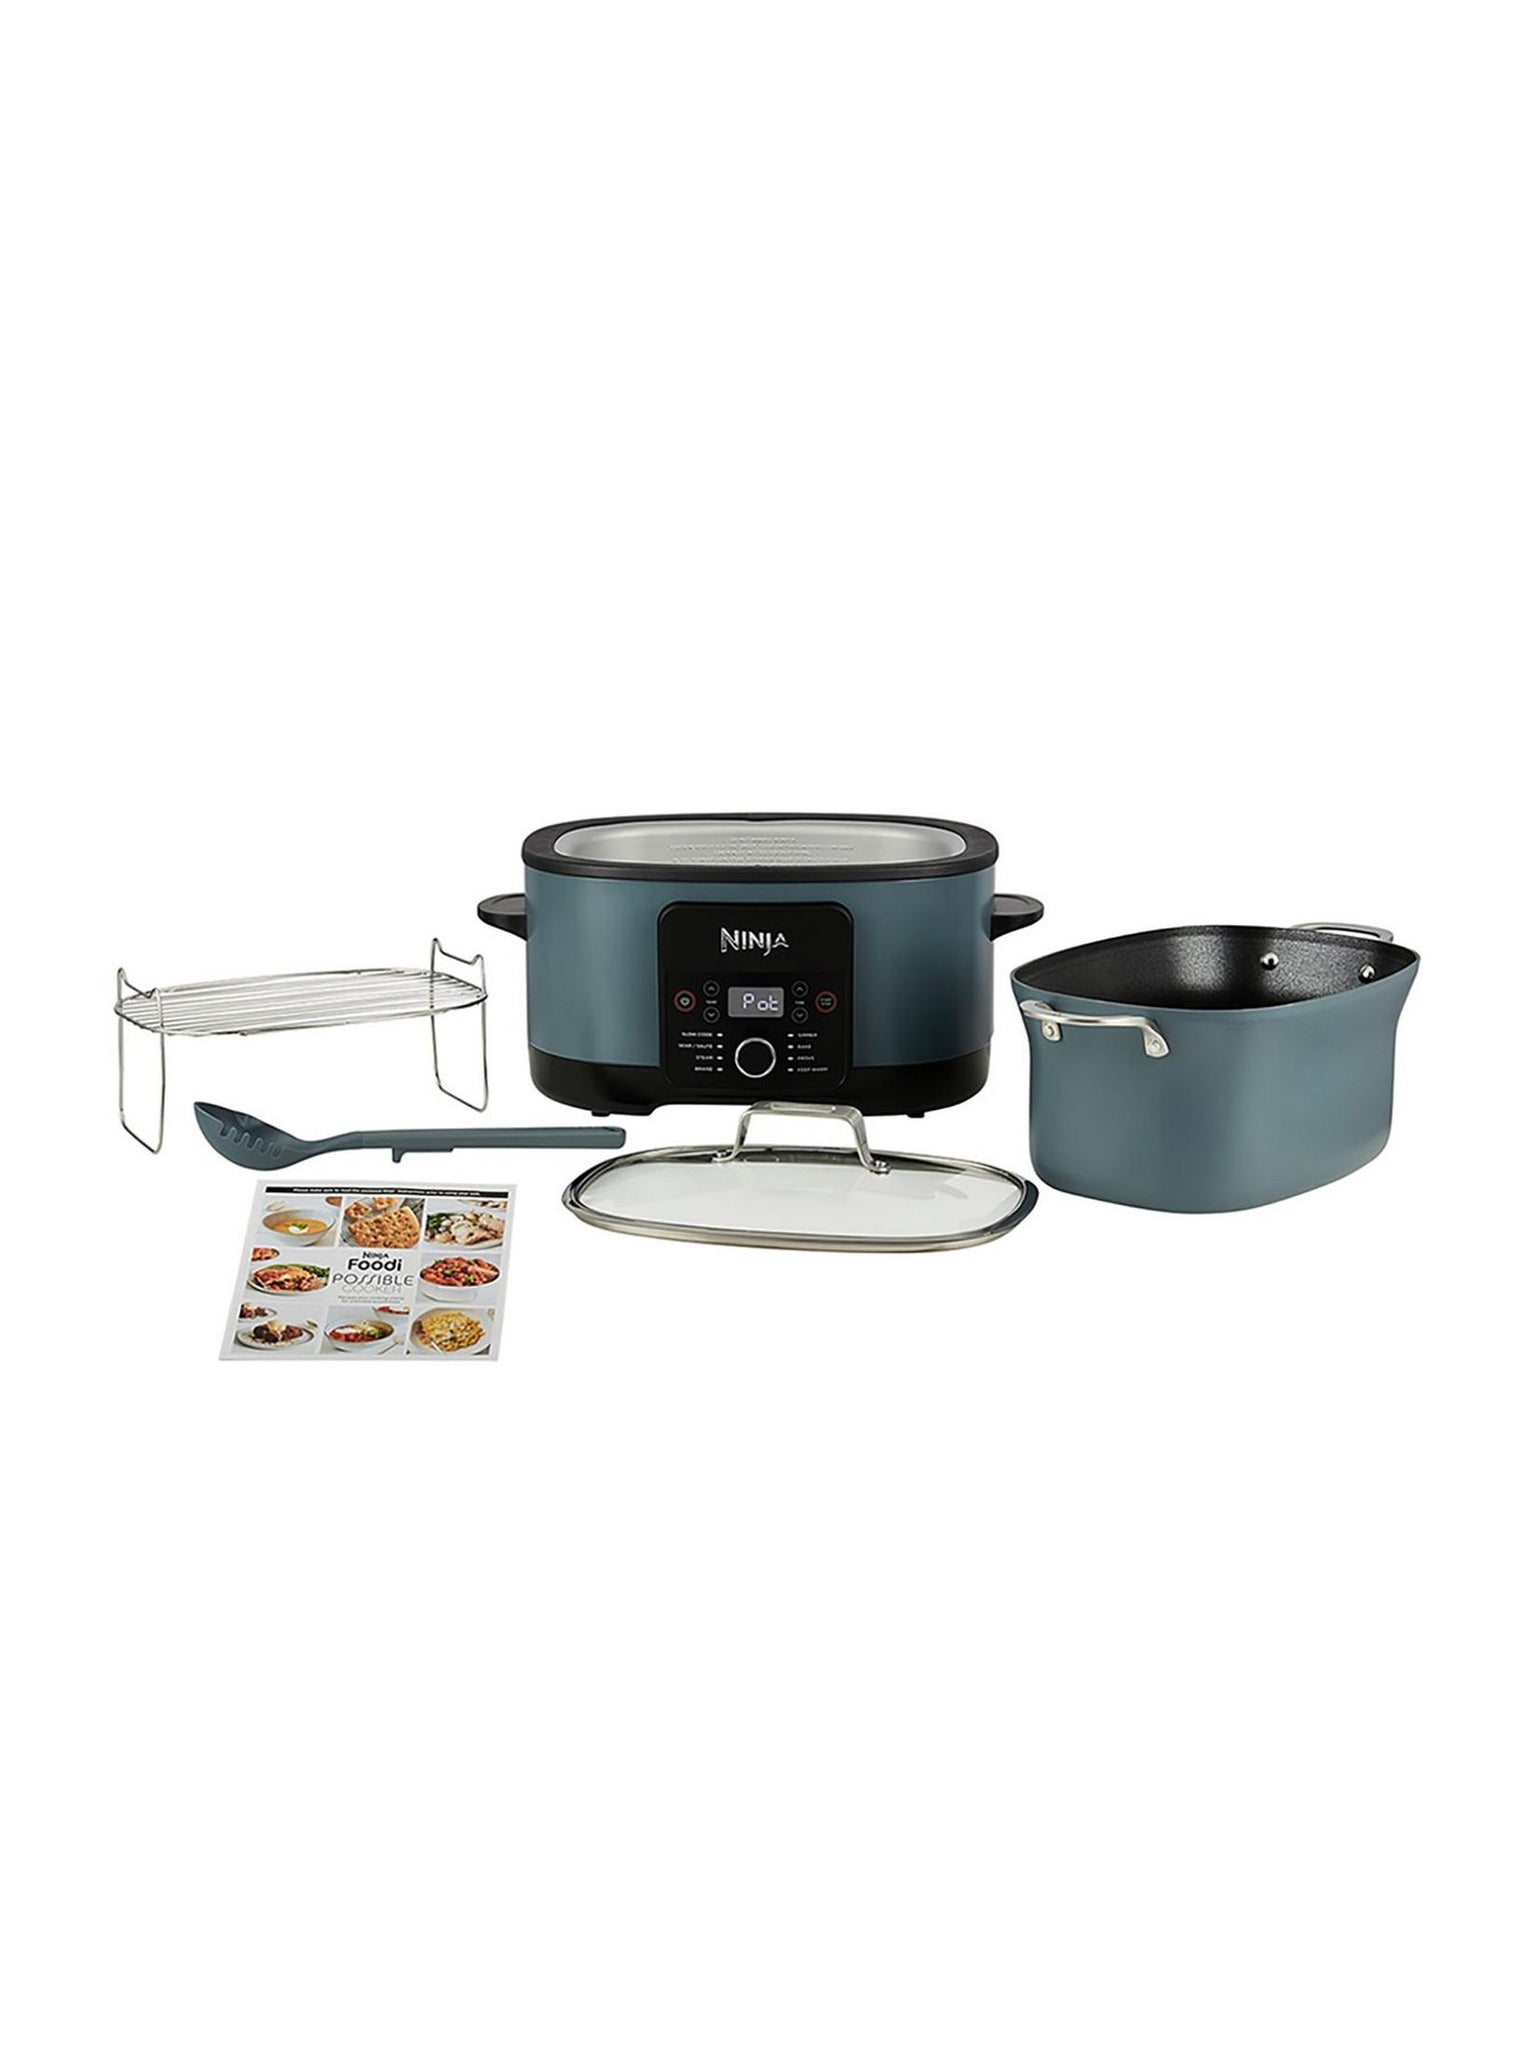 Ninja Kitchen Ghana on Instagram: Ninja Foodi PossibleCooker 8-in-1 Cooker  [Sea Salt Grey] Just throw in all of your ingredients and come back to a  perfectly cooked meal. Perfect for entertaining, the